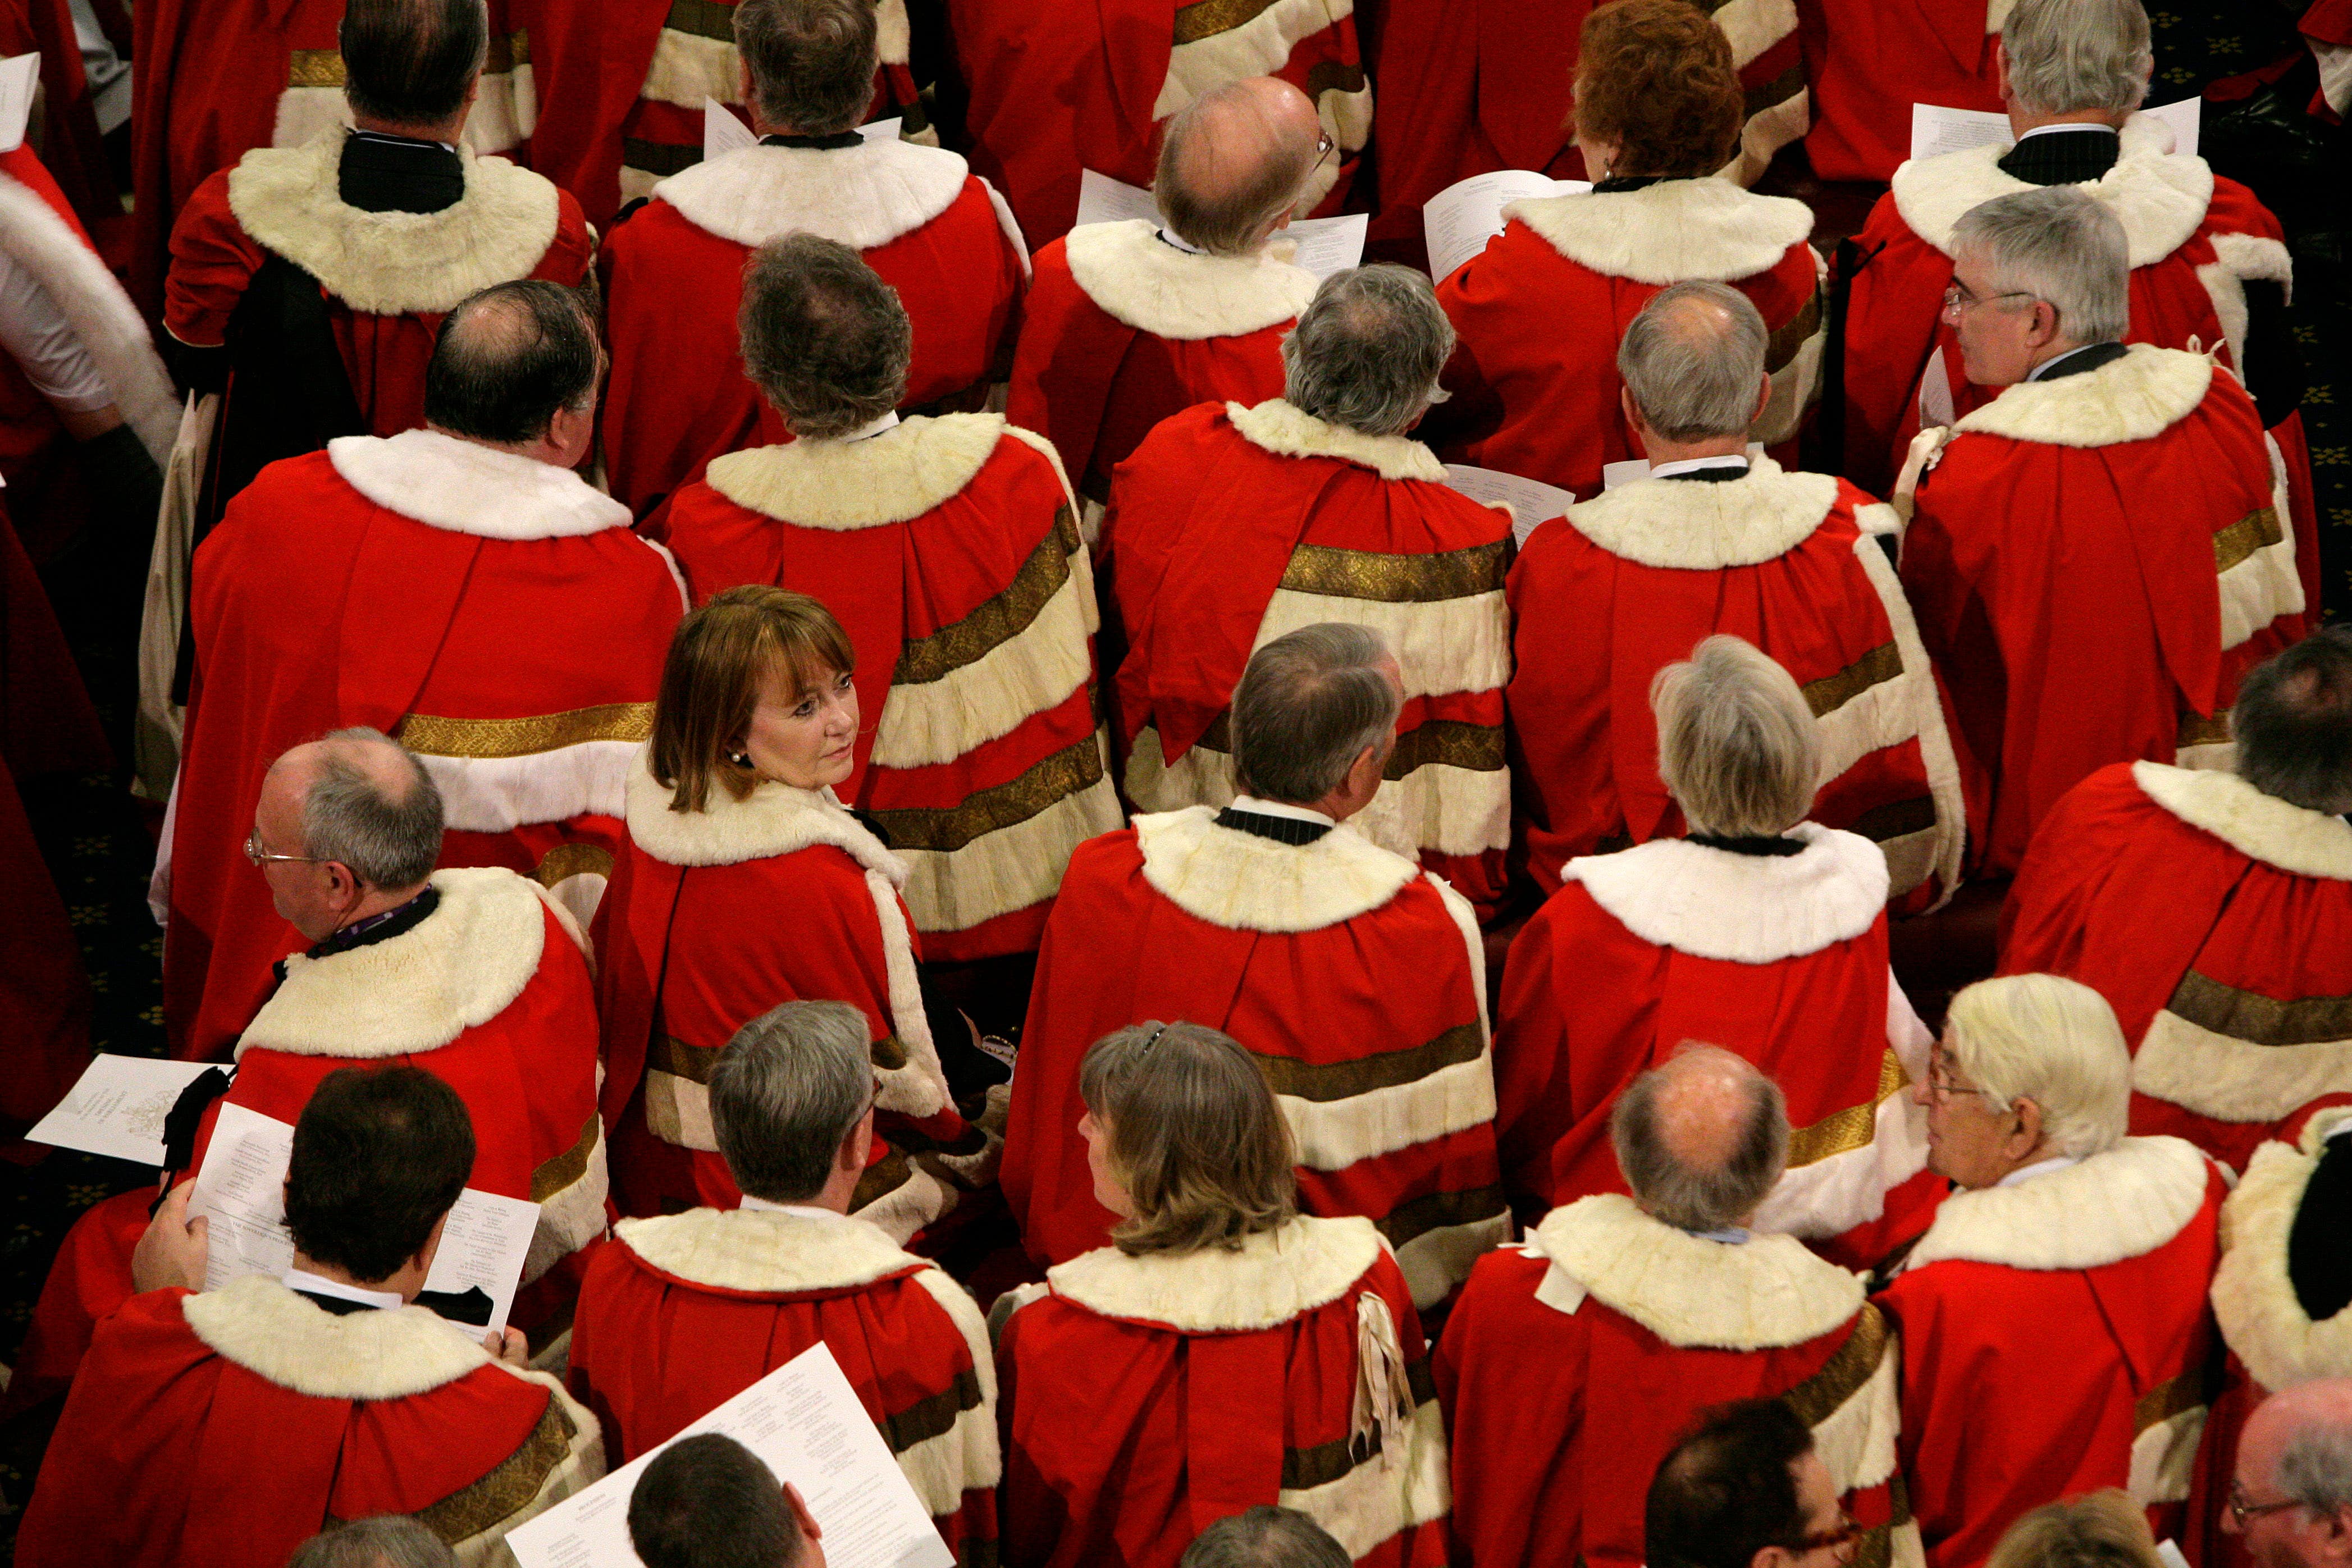 Opponents of the proposals have not challenged the idea that the Lords is in pressing need of reform